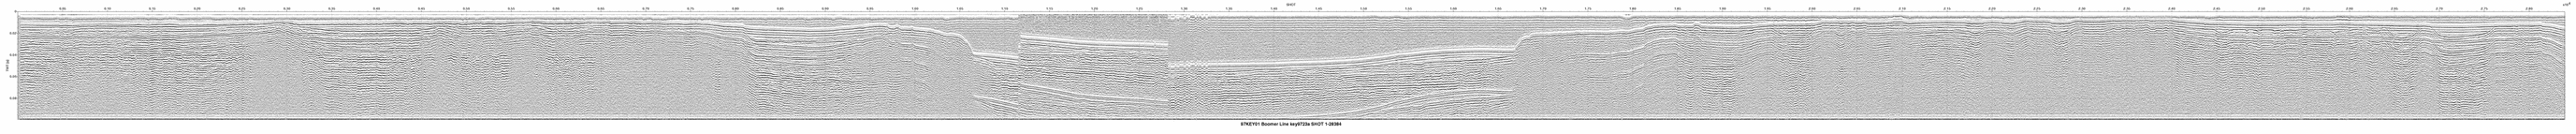 Thumbnail GIF image of the seismic trackline key9723a, with a hotlink to the more detailed, larger JPG image.